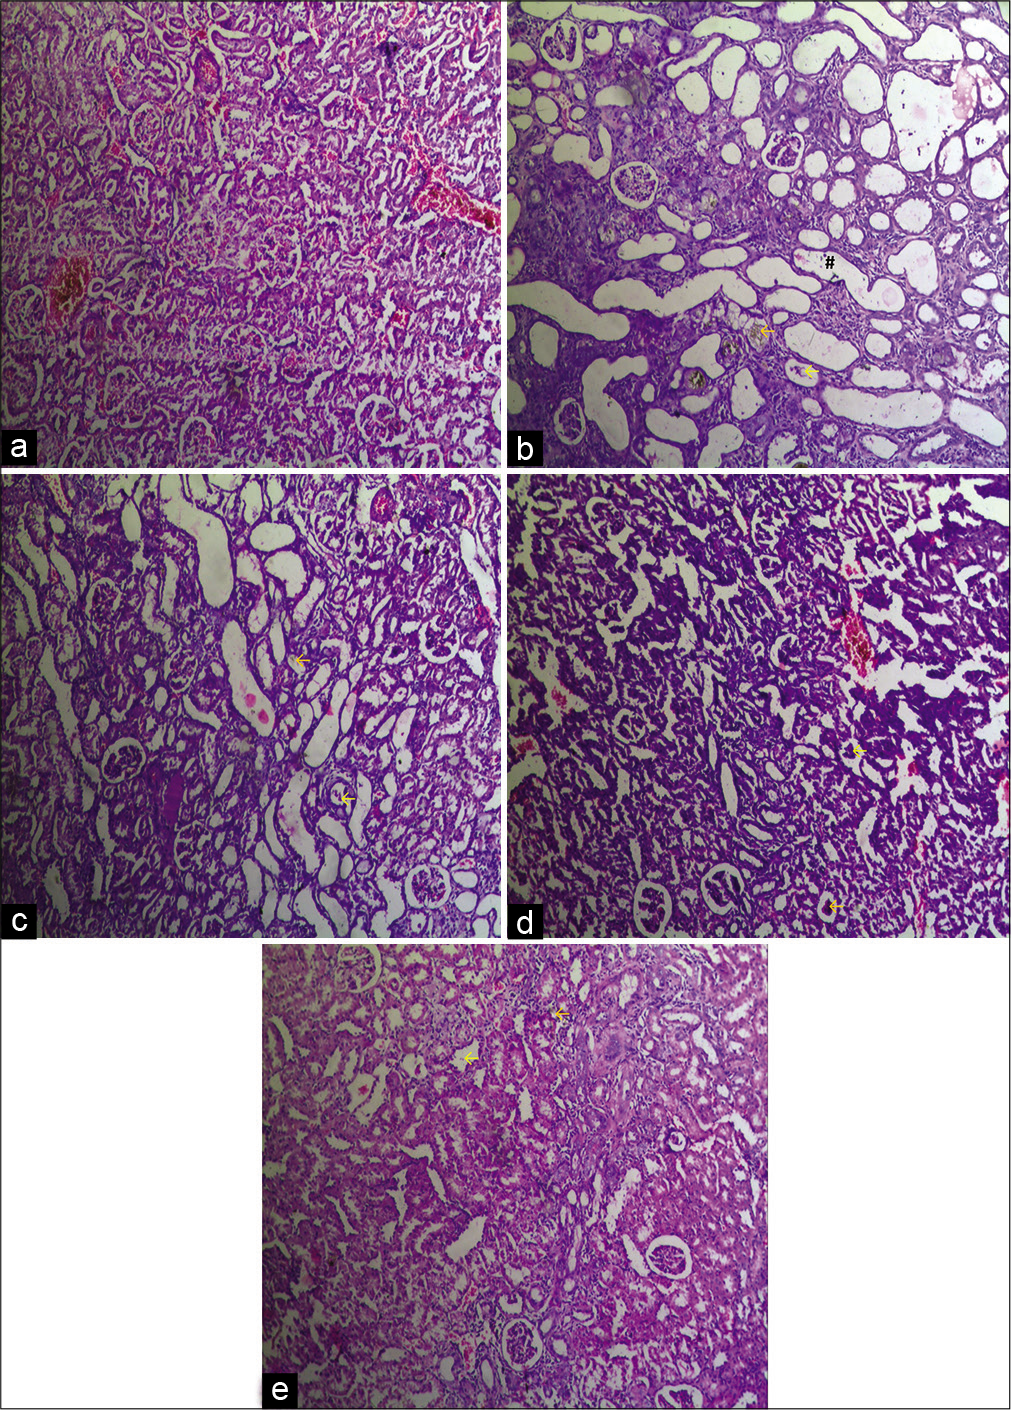 Effect of lycopene on kidney histopathological changes (H and E staining [×10]) in adenine-induced chronic renal failure in rat. (a) Normal control, (b) diseases control, (c) 100 mg/kg Lycopene+Adenine, (d) 200 mg/kg Lycopene+Adenine, (e) 400 mg/ kg Lycopene+Adenine. *: Degeneration of glomeruli; #: Dilated tubule; †: Thickening of bowman capsules; ←: Tubular atrophy; ←: Adenine crystal deposition; ←: Brush border loss of proximal tubule; ←: Inflammatory cells infiltration.